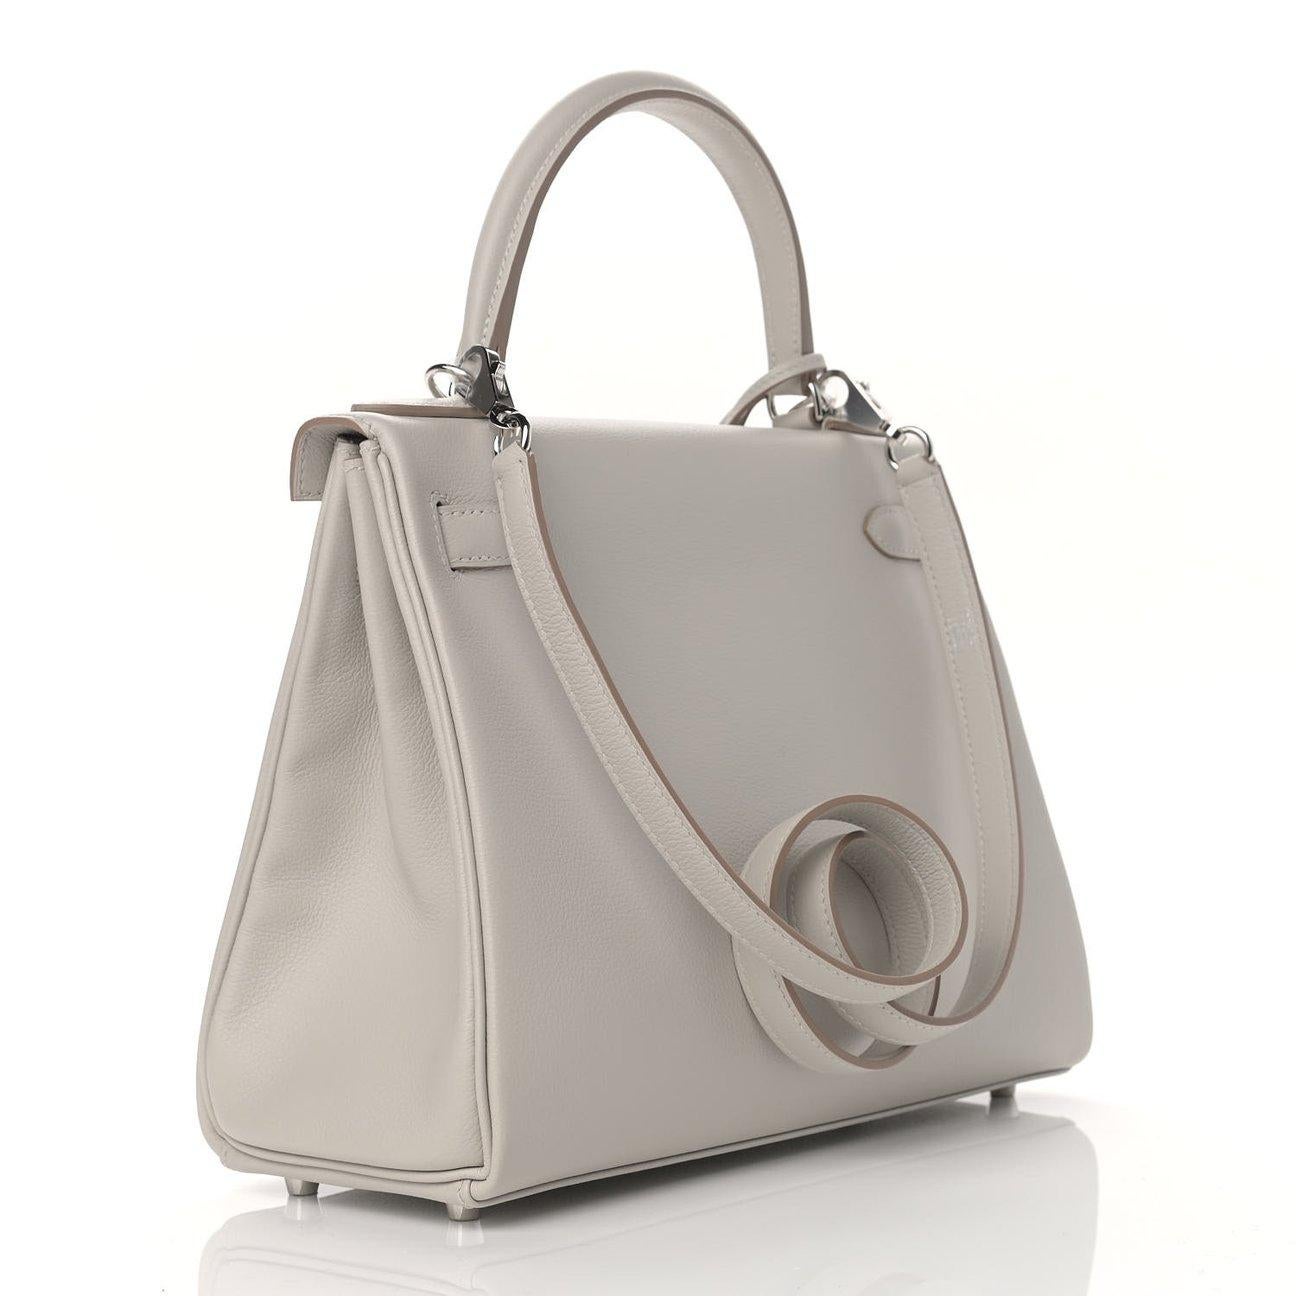 New Condition
From 2021 Collection
Gris Perle
Evercolor Leather
Palladium Hardware
Measures 10.75